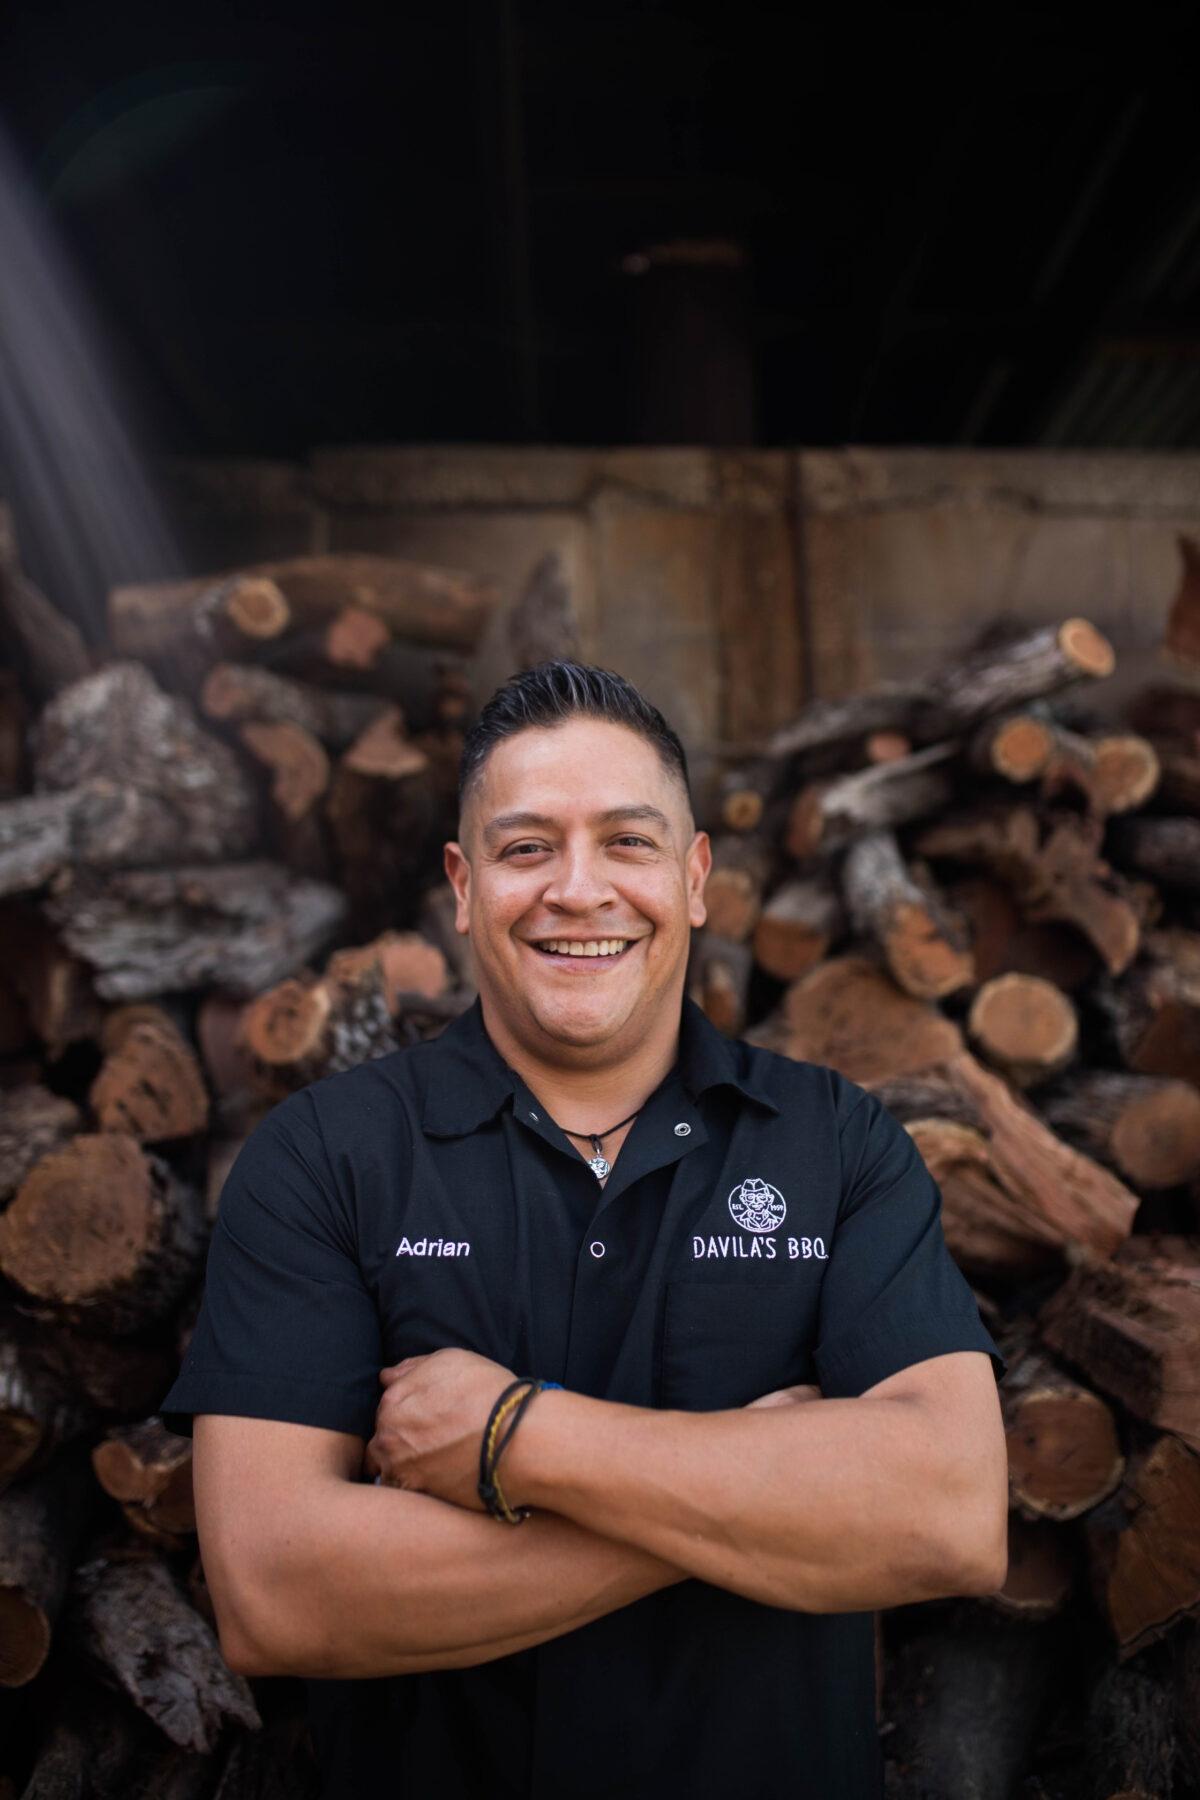 Chef, author, and TV personality Adrian Davila has succeeded his father as pitmaster at Davila's BBQ in Seguin, Texas. (Courtesy of Davila's BBQ)